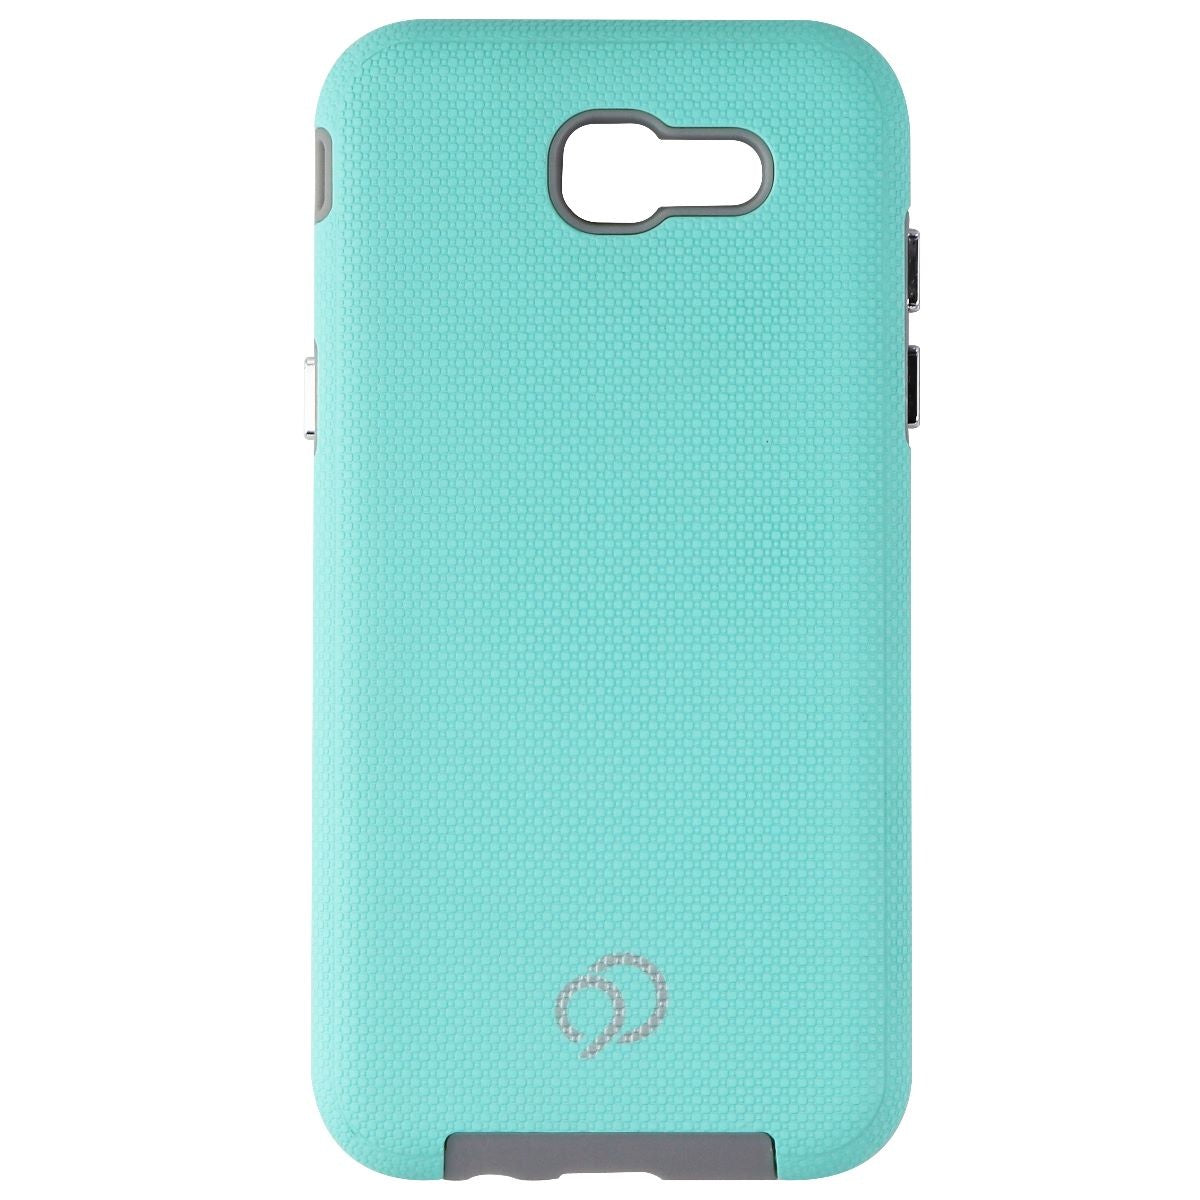 Nimbus9 Latitude Dual Layer Case for Samsung J3 Emerge - Textured Teal/Gray Cell Phone - Cases, Covers & Skins Nimbus9    - Simple Cell Bulk Wholesale Pricing - USA Seller